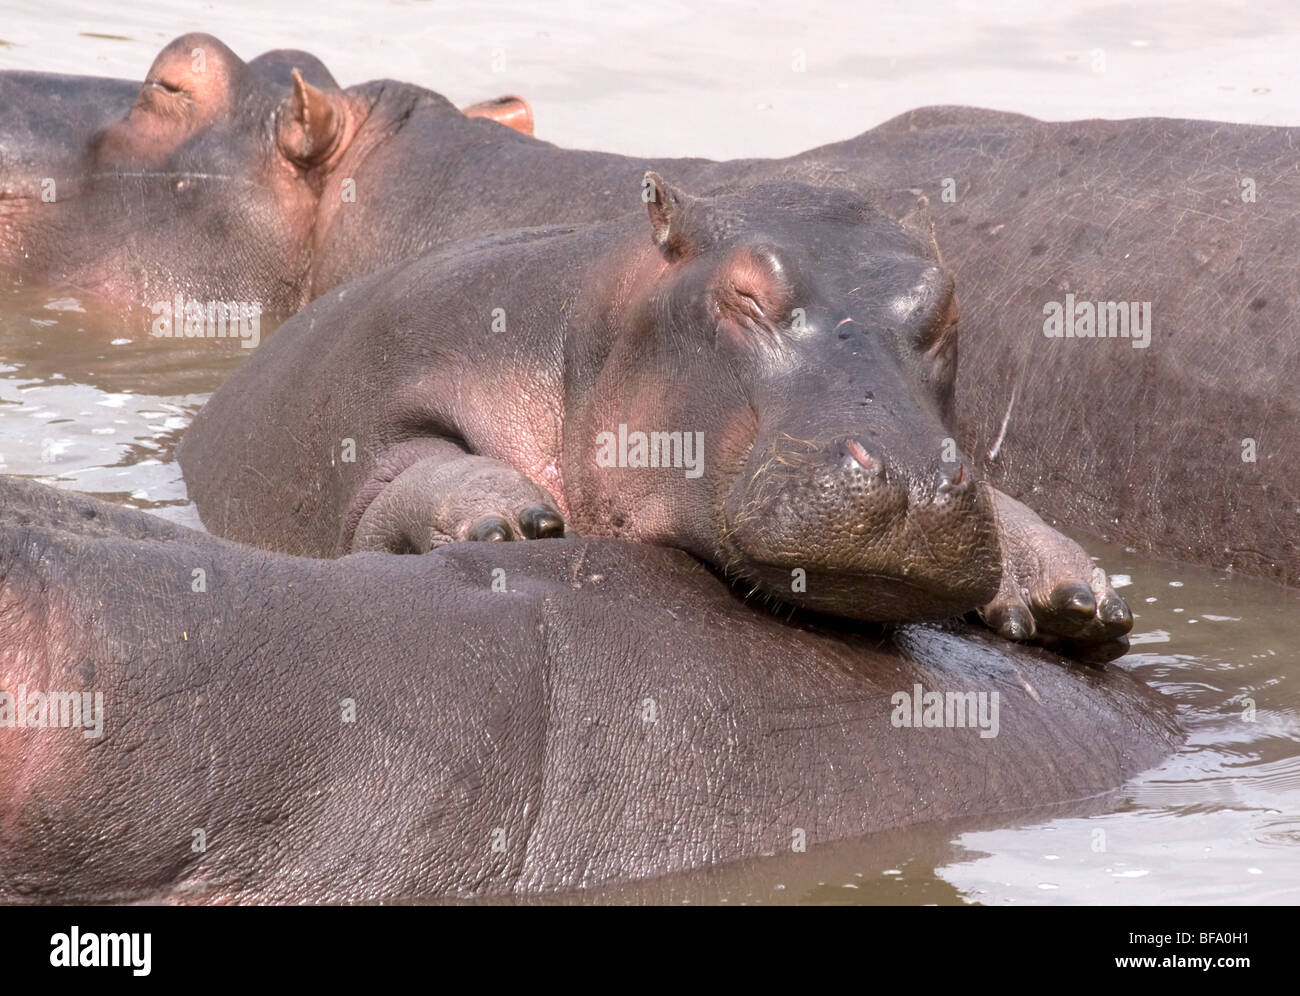 Young-Hippo "cooling off" Stockfoto